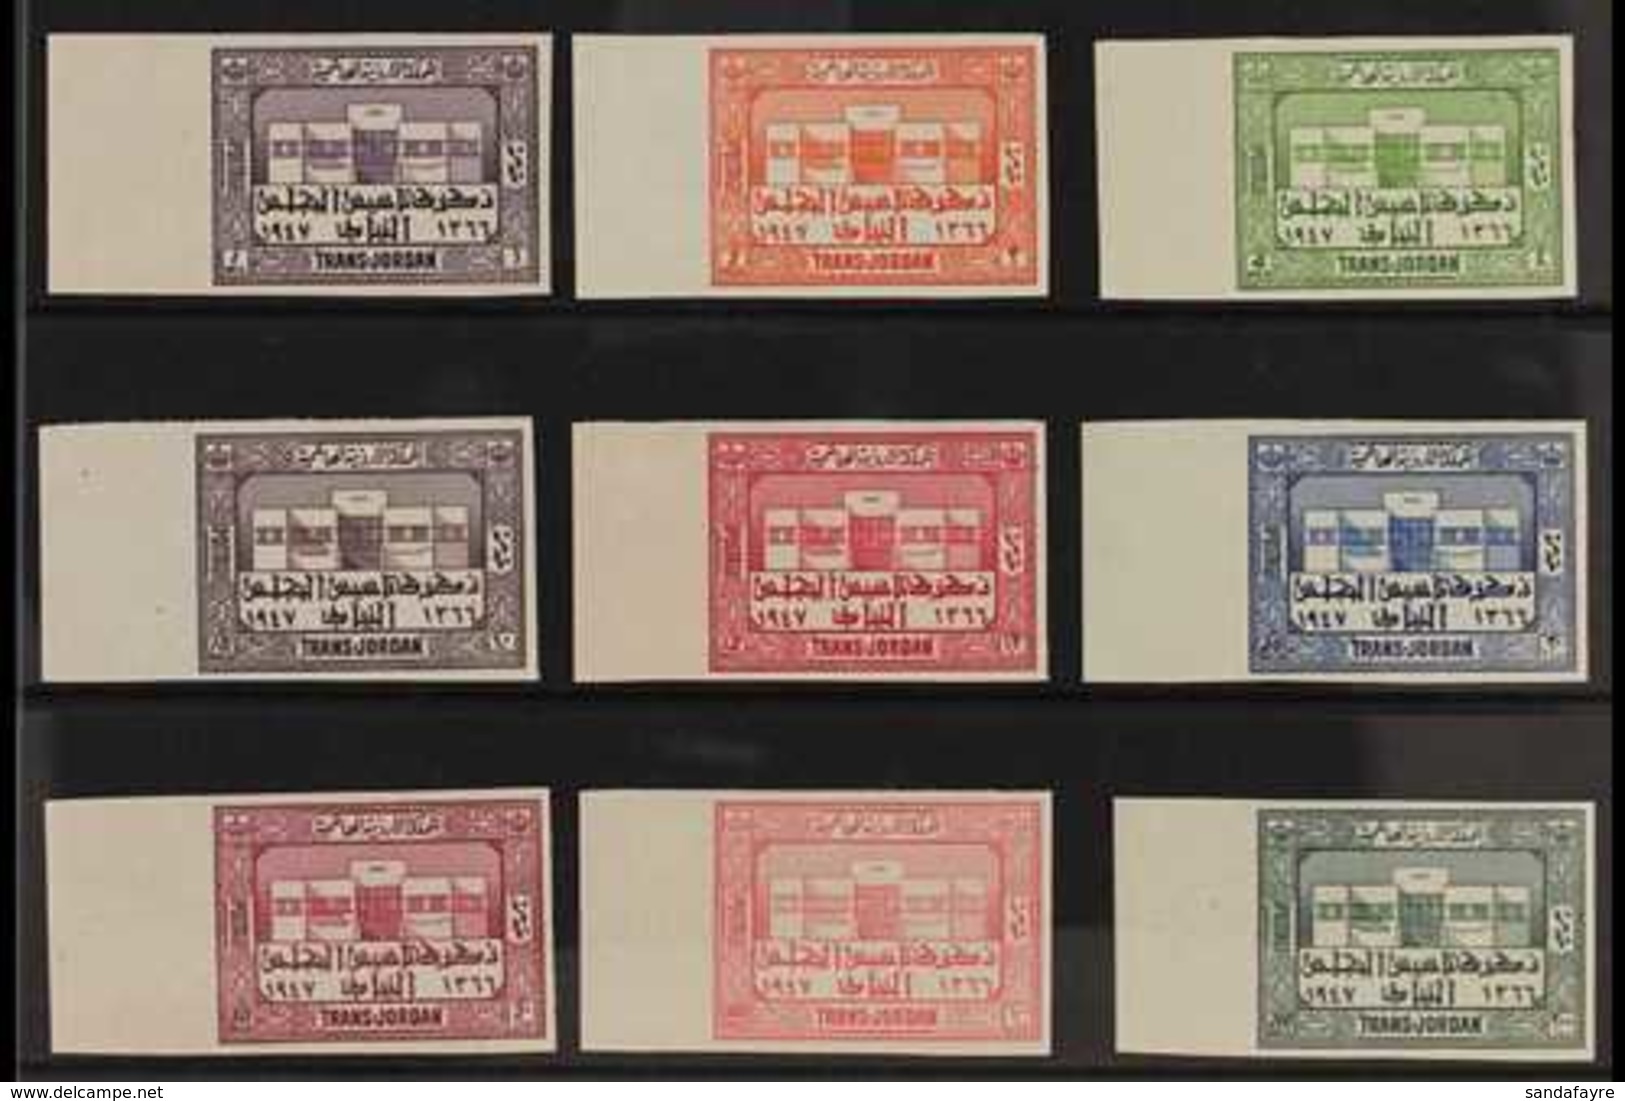 1947 Parliament IMPERF Complete Set (as SG 276/84, Michel 206/14 - See Note In Catalogue), Superb Never Hinged Mint Left - Jordanië